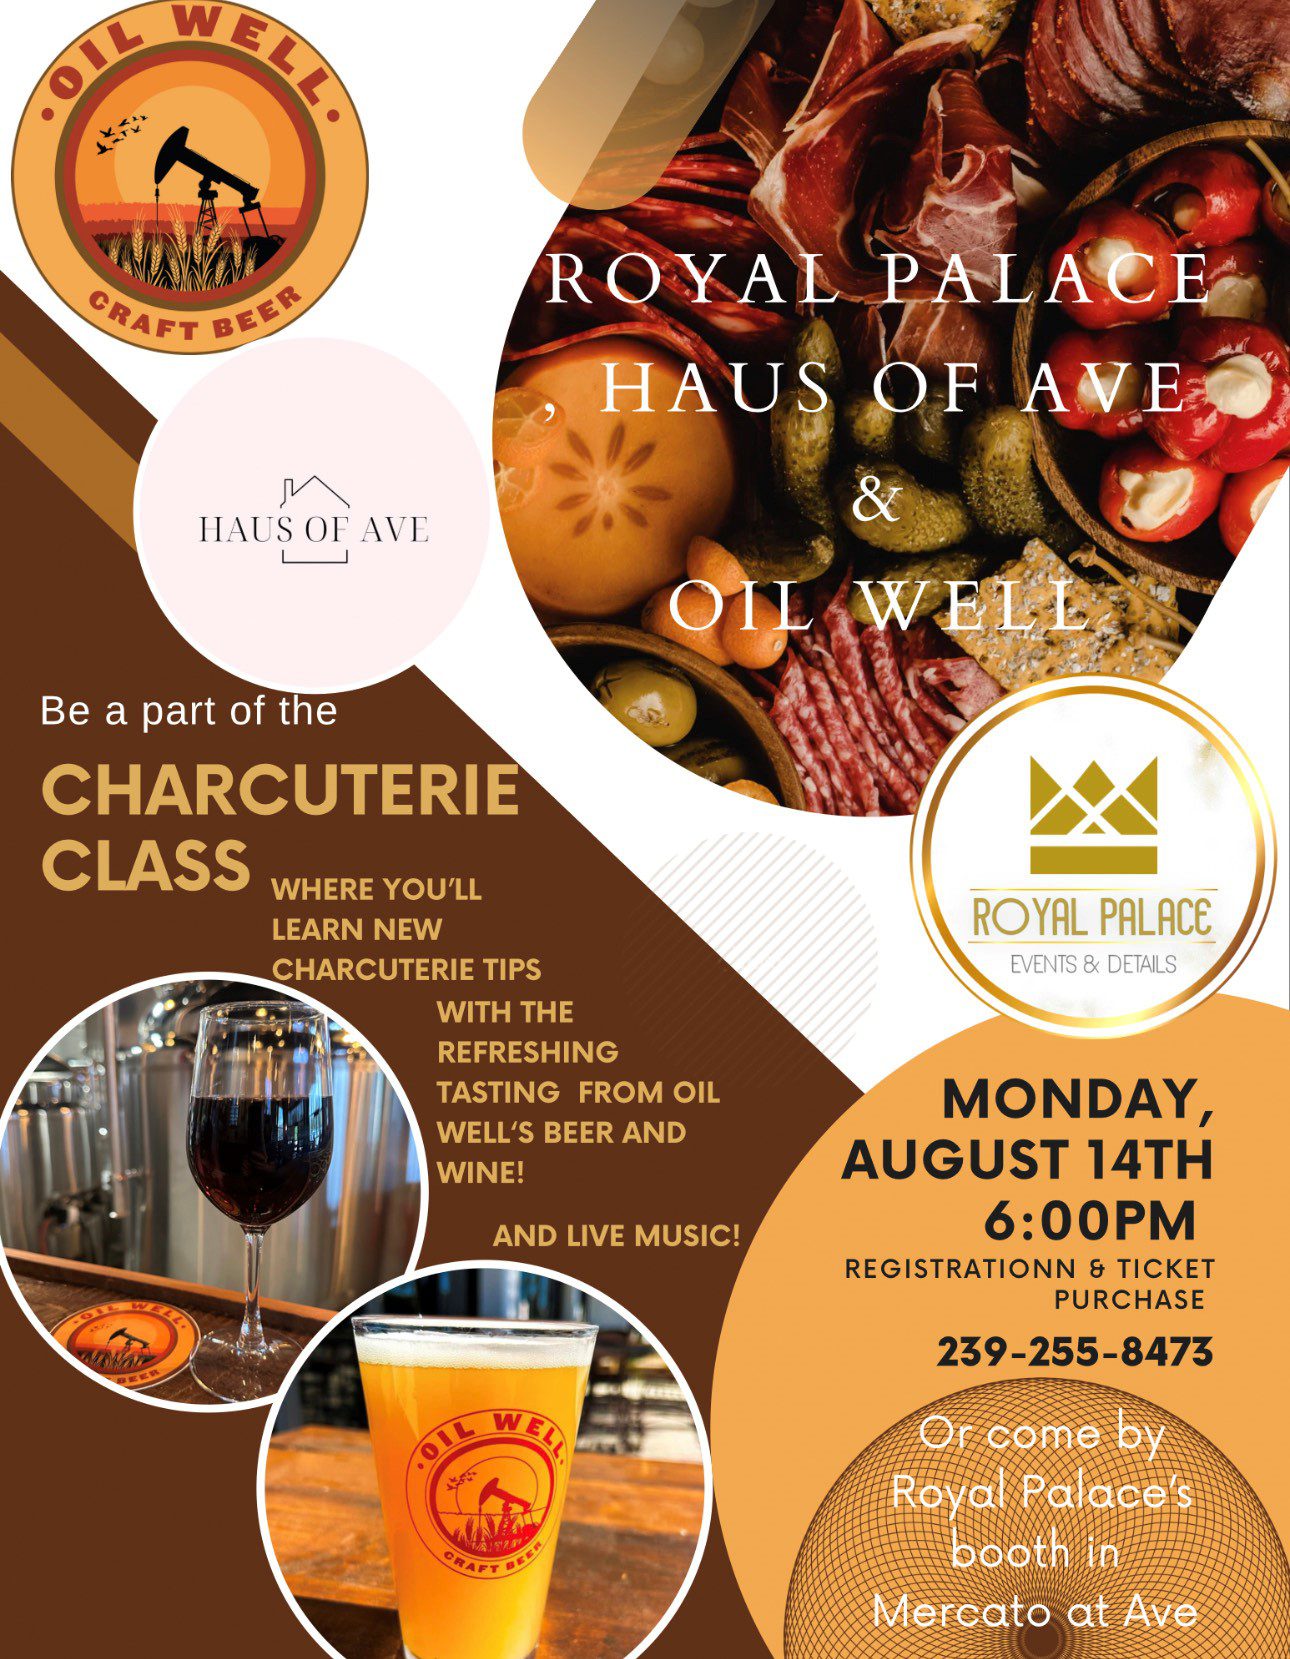 Oil Well Craft Beer, Haus of Ave and Royal Palace Events Charcuterie Class Event on Monday, Aug. 14 Flyer